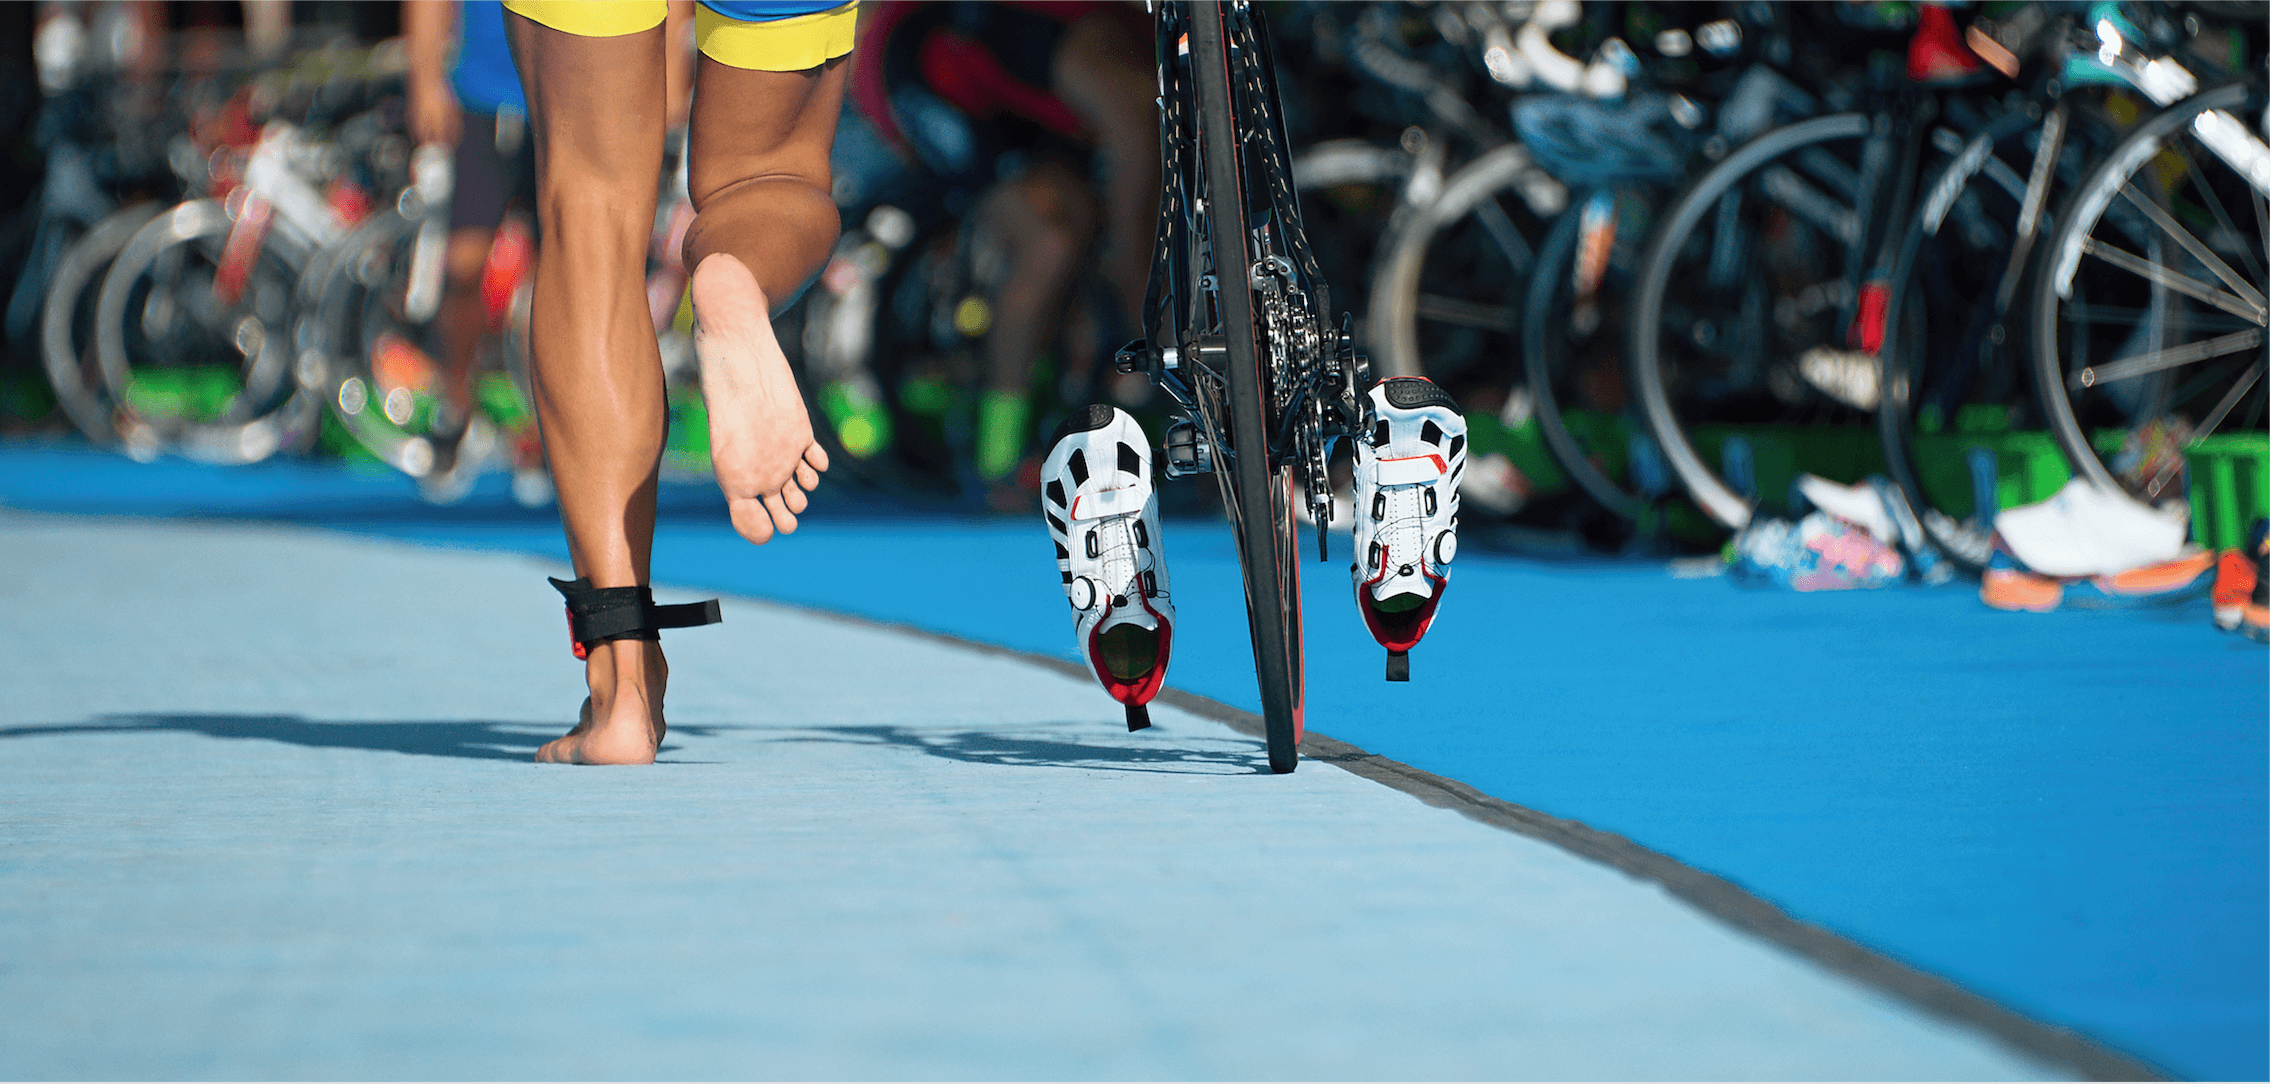 Barefoot running alongside bike with pedals clipped in